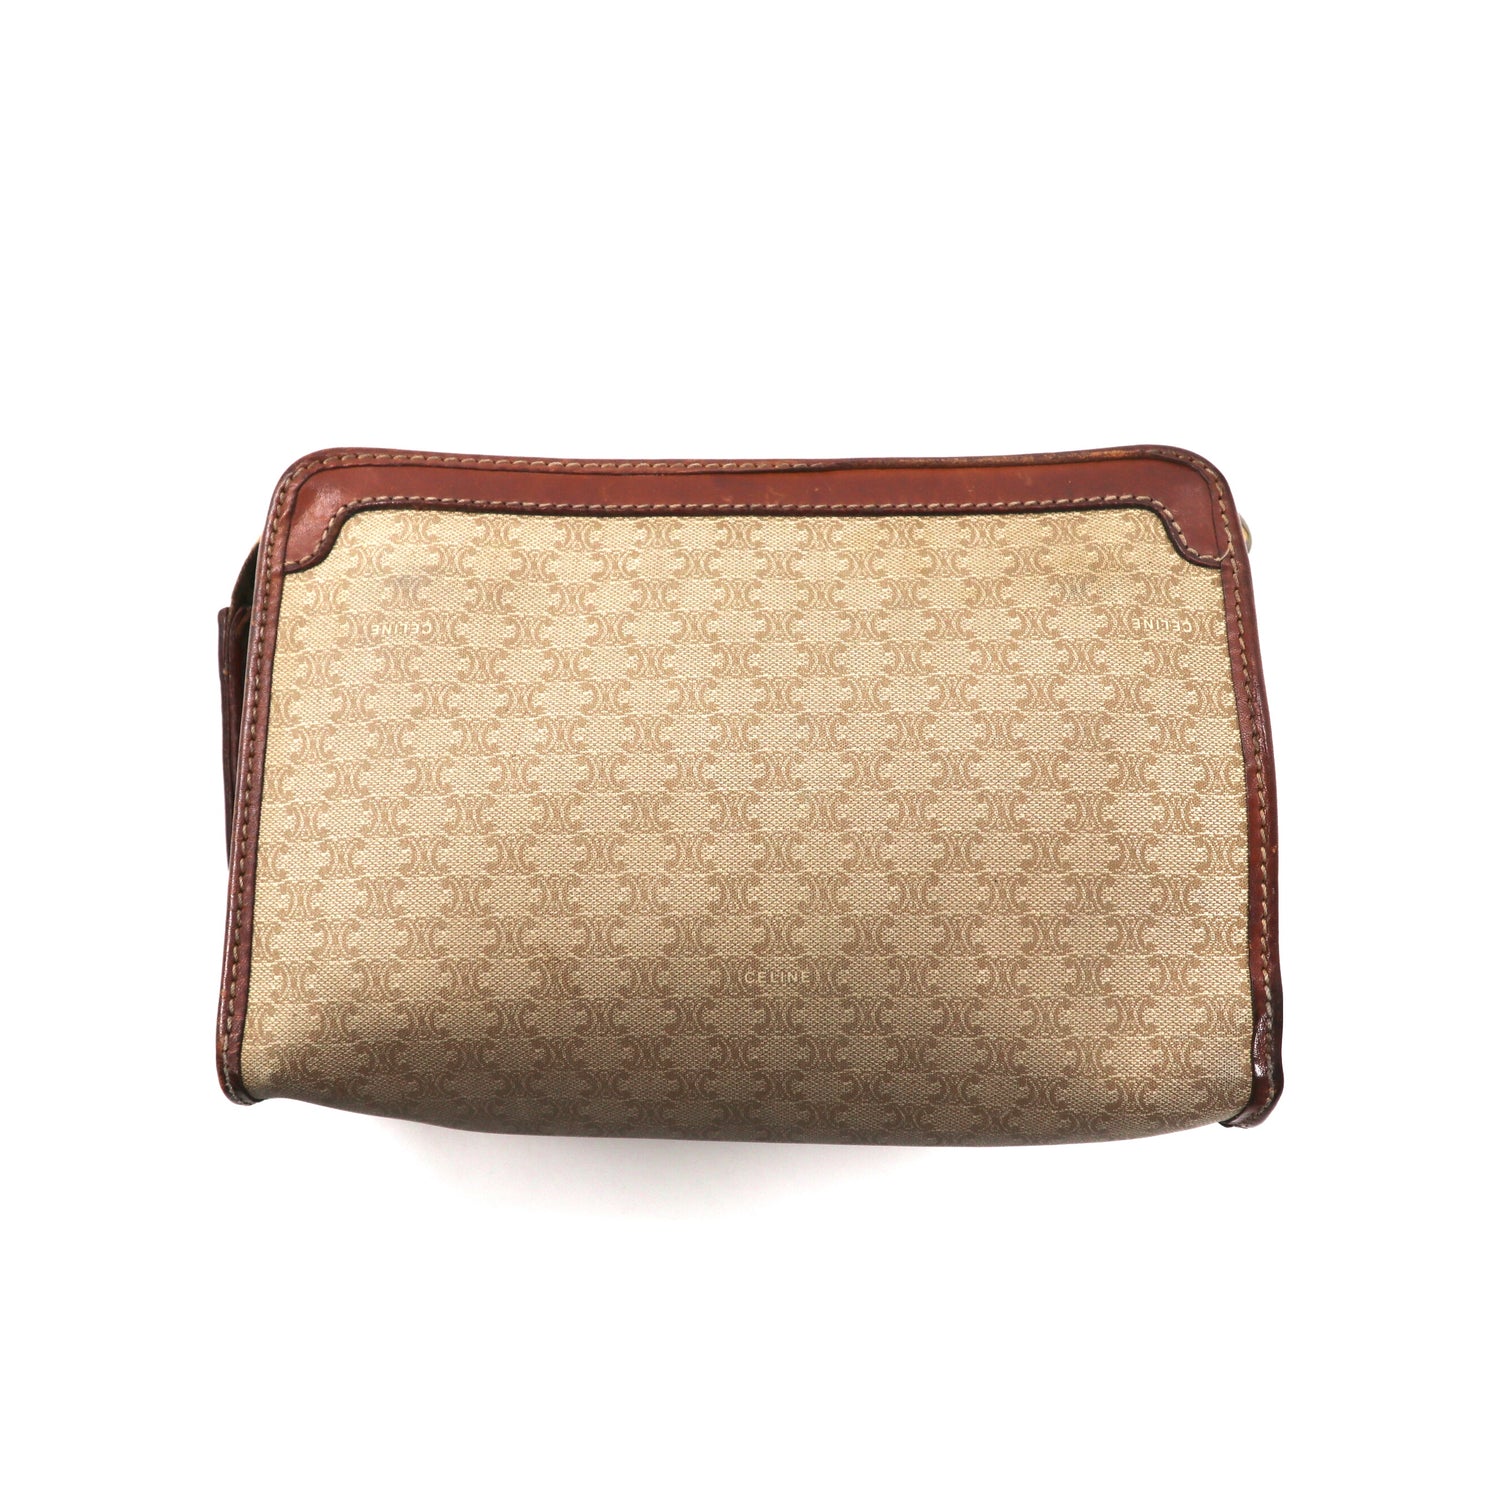 CELINE Clutch Bag Beige Leather Macadam Pattern M06 Made in Italy 